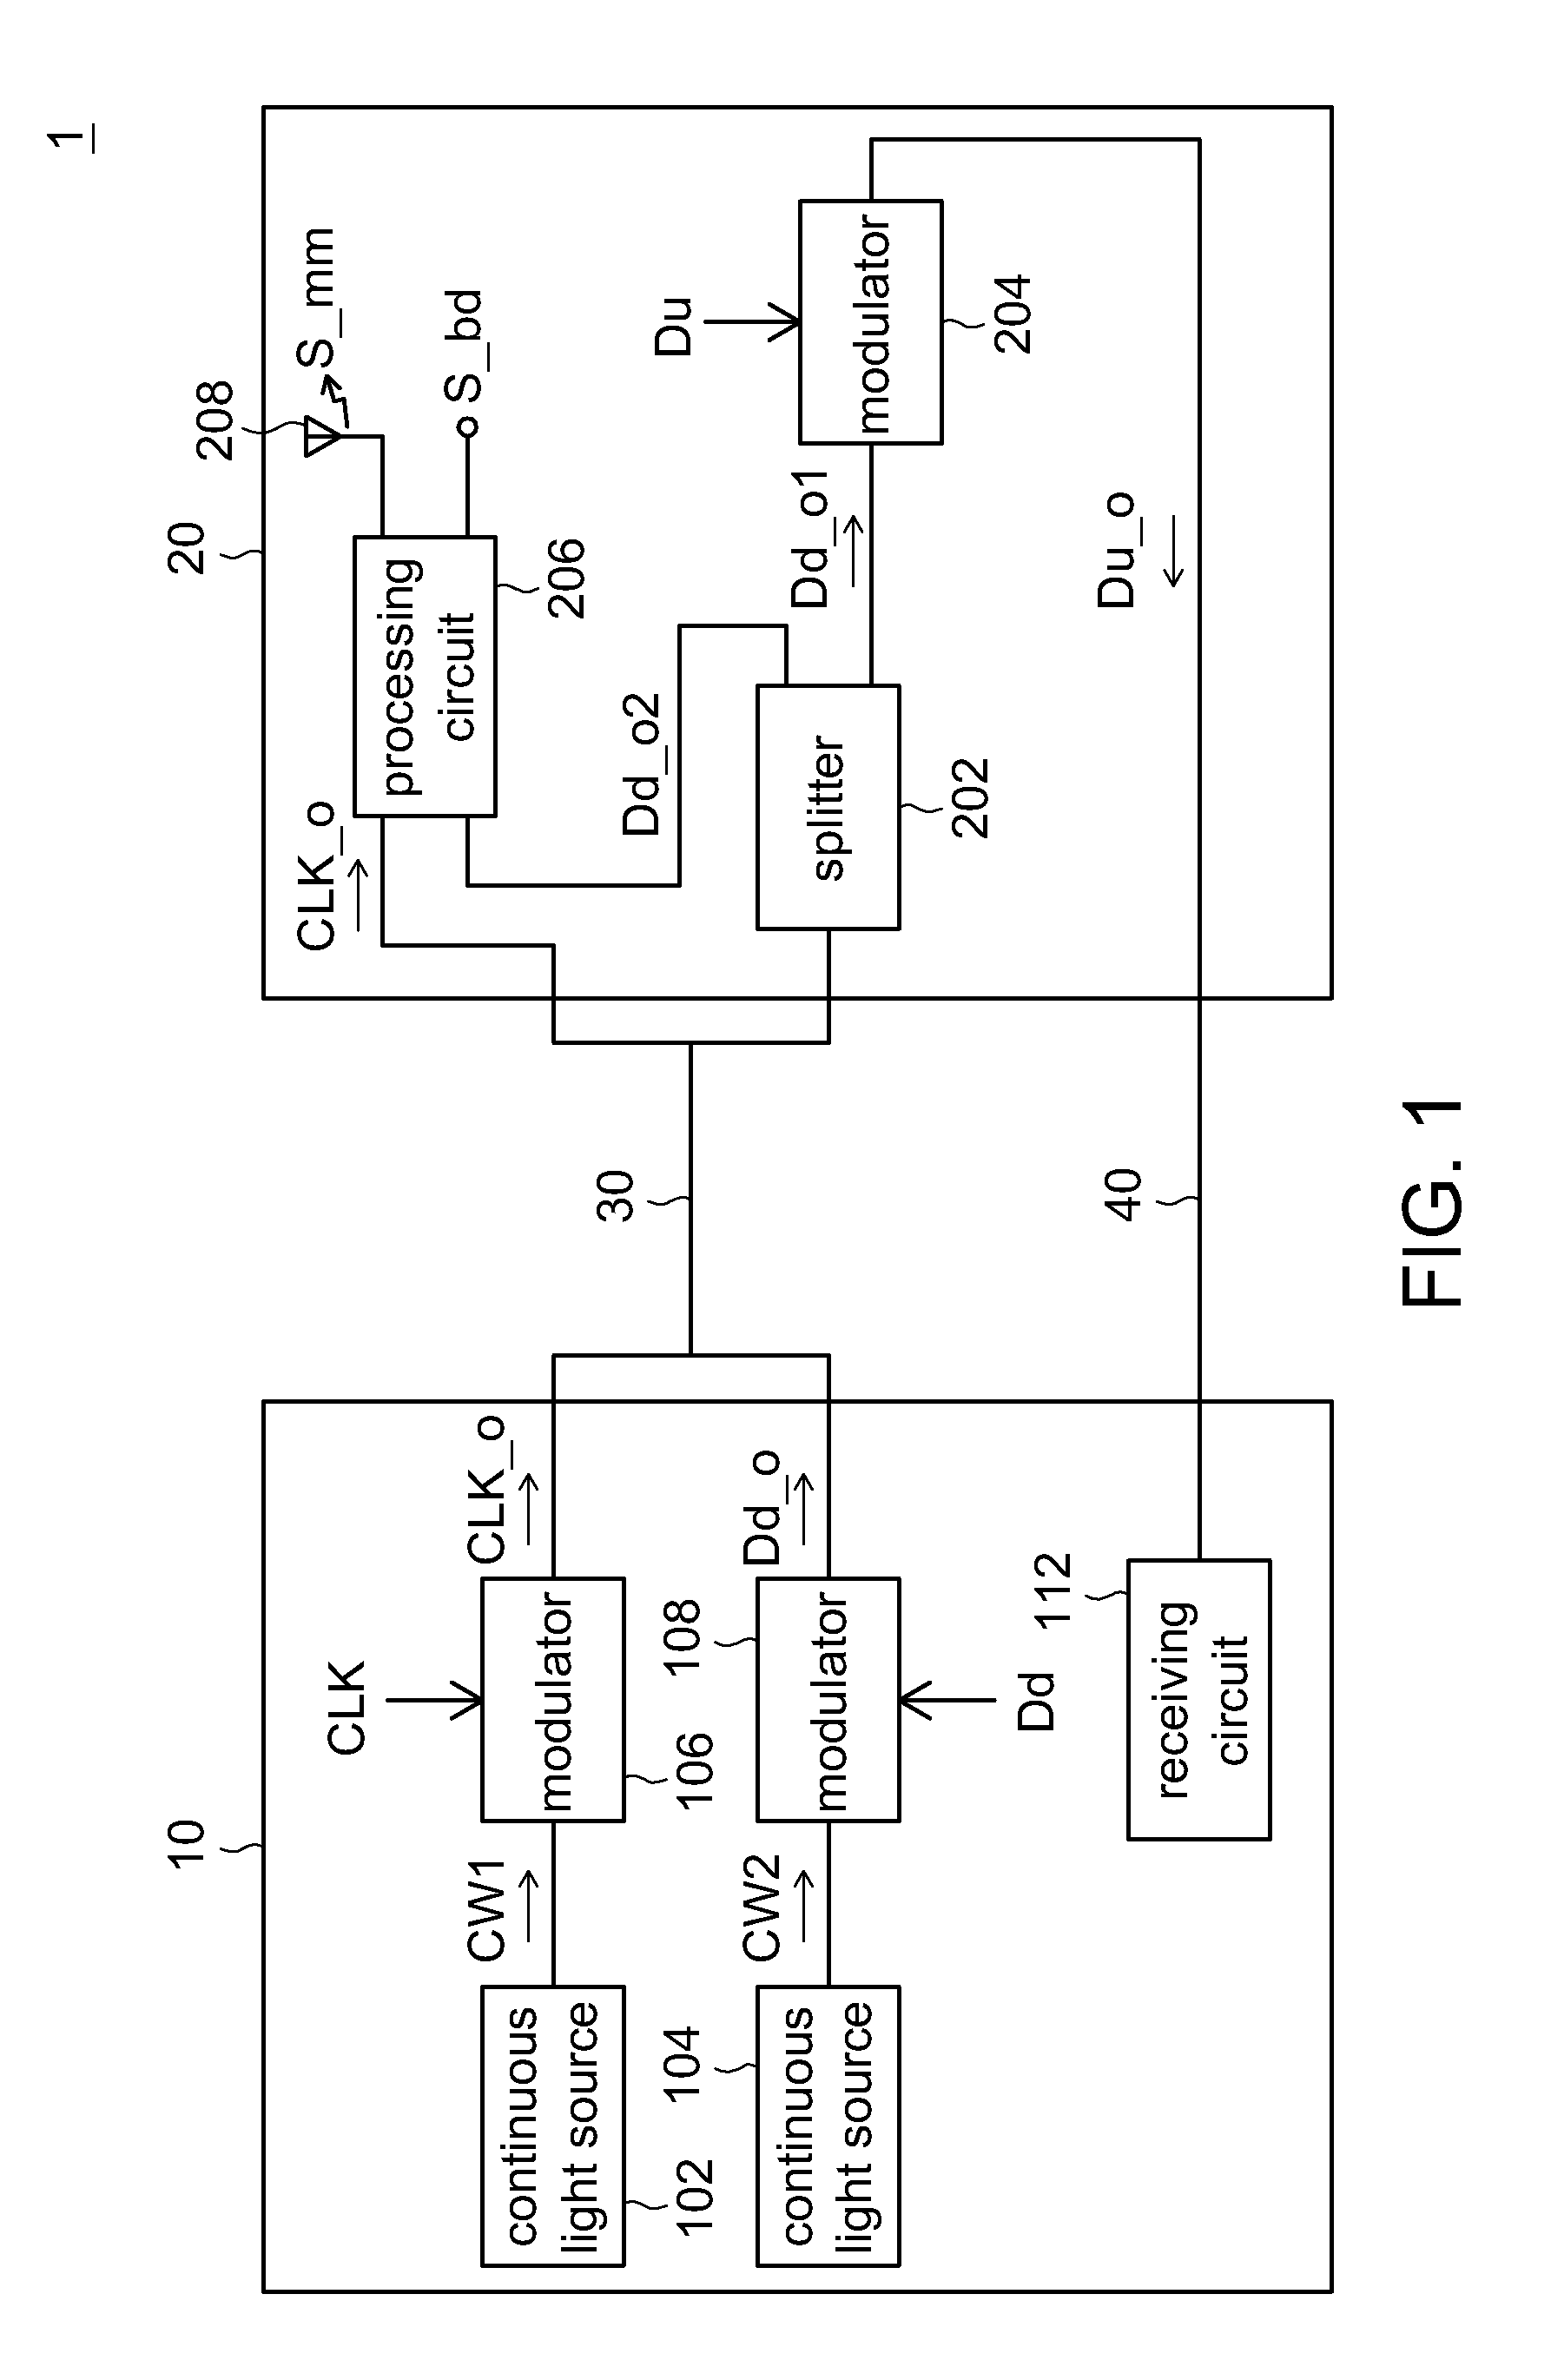 Head-End Circuit and Remote Antenna Unit and Hybrid Wired/Wireless Network System and Transceiving Method Using Thereof